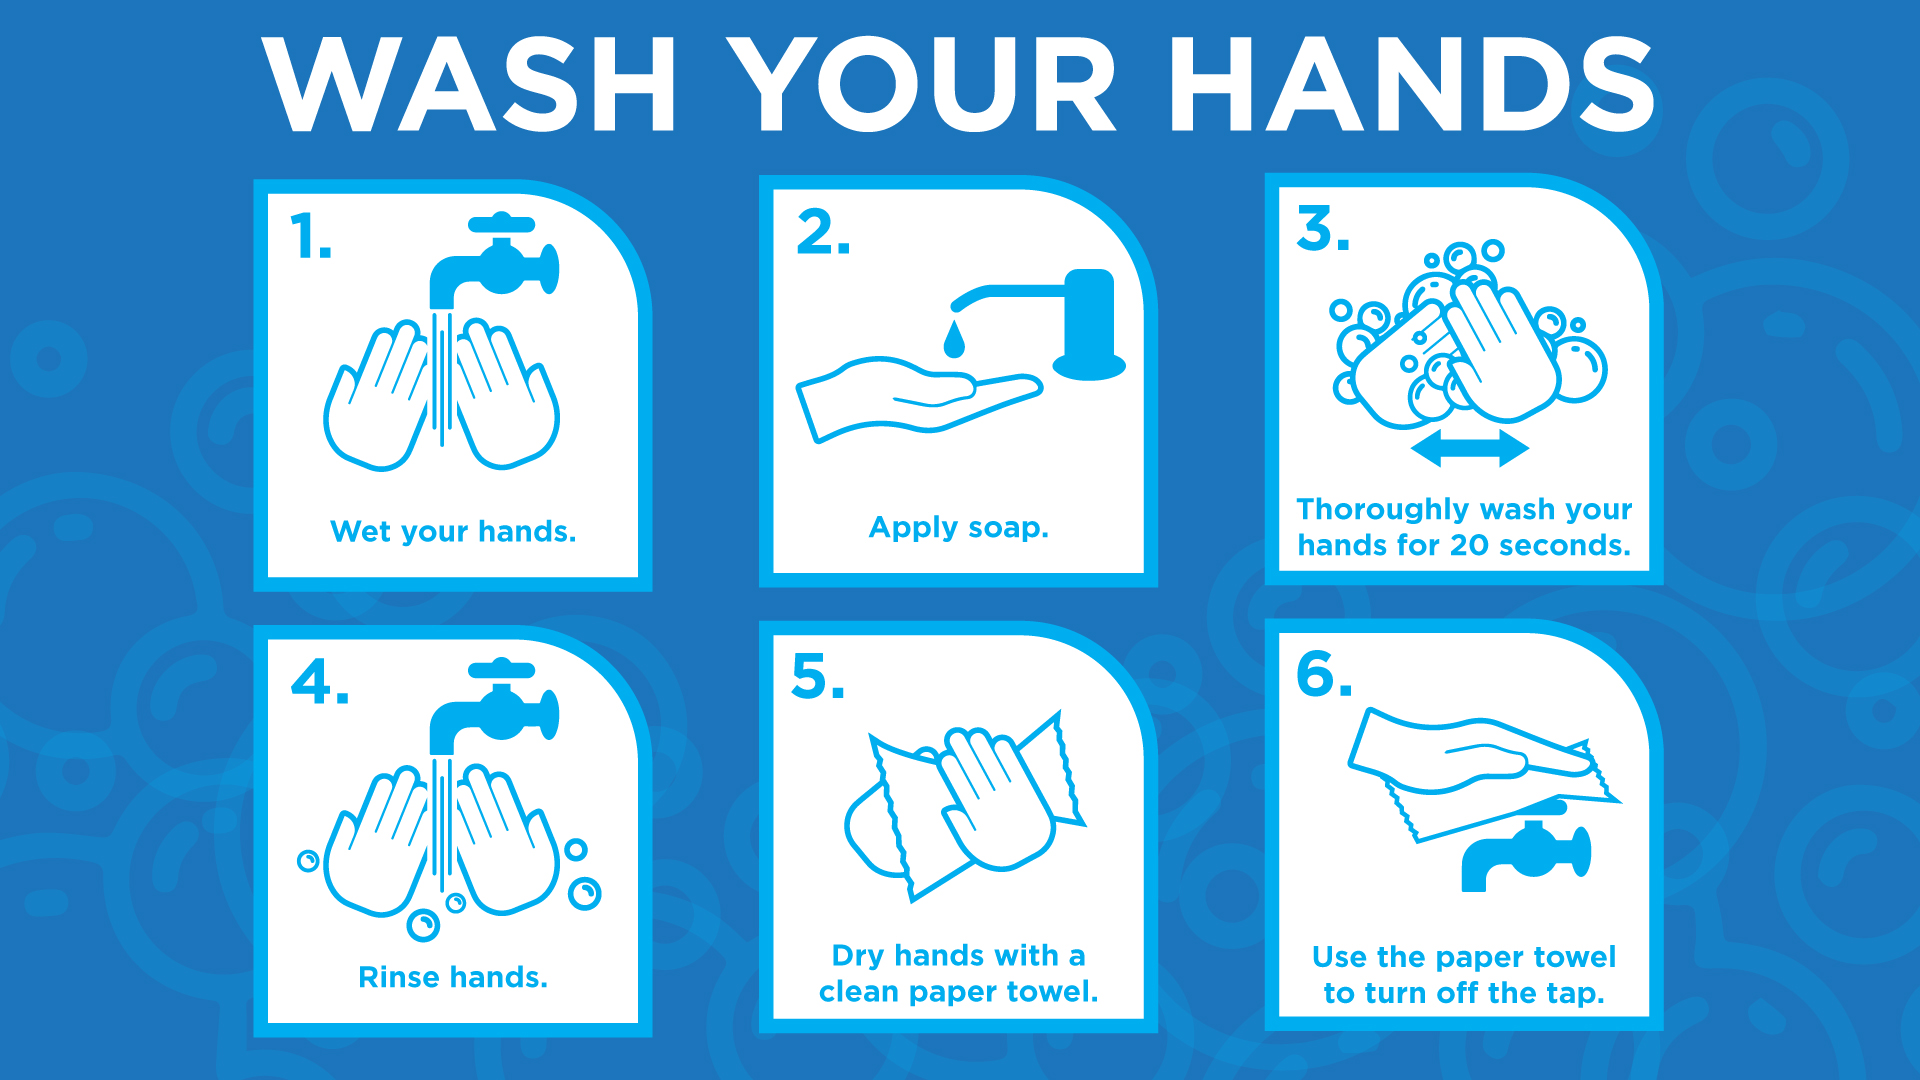 Wash Hands Poster 24”x 12”, printed on White FoamCore (inside)